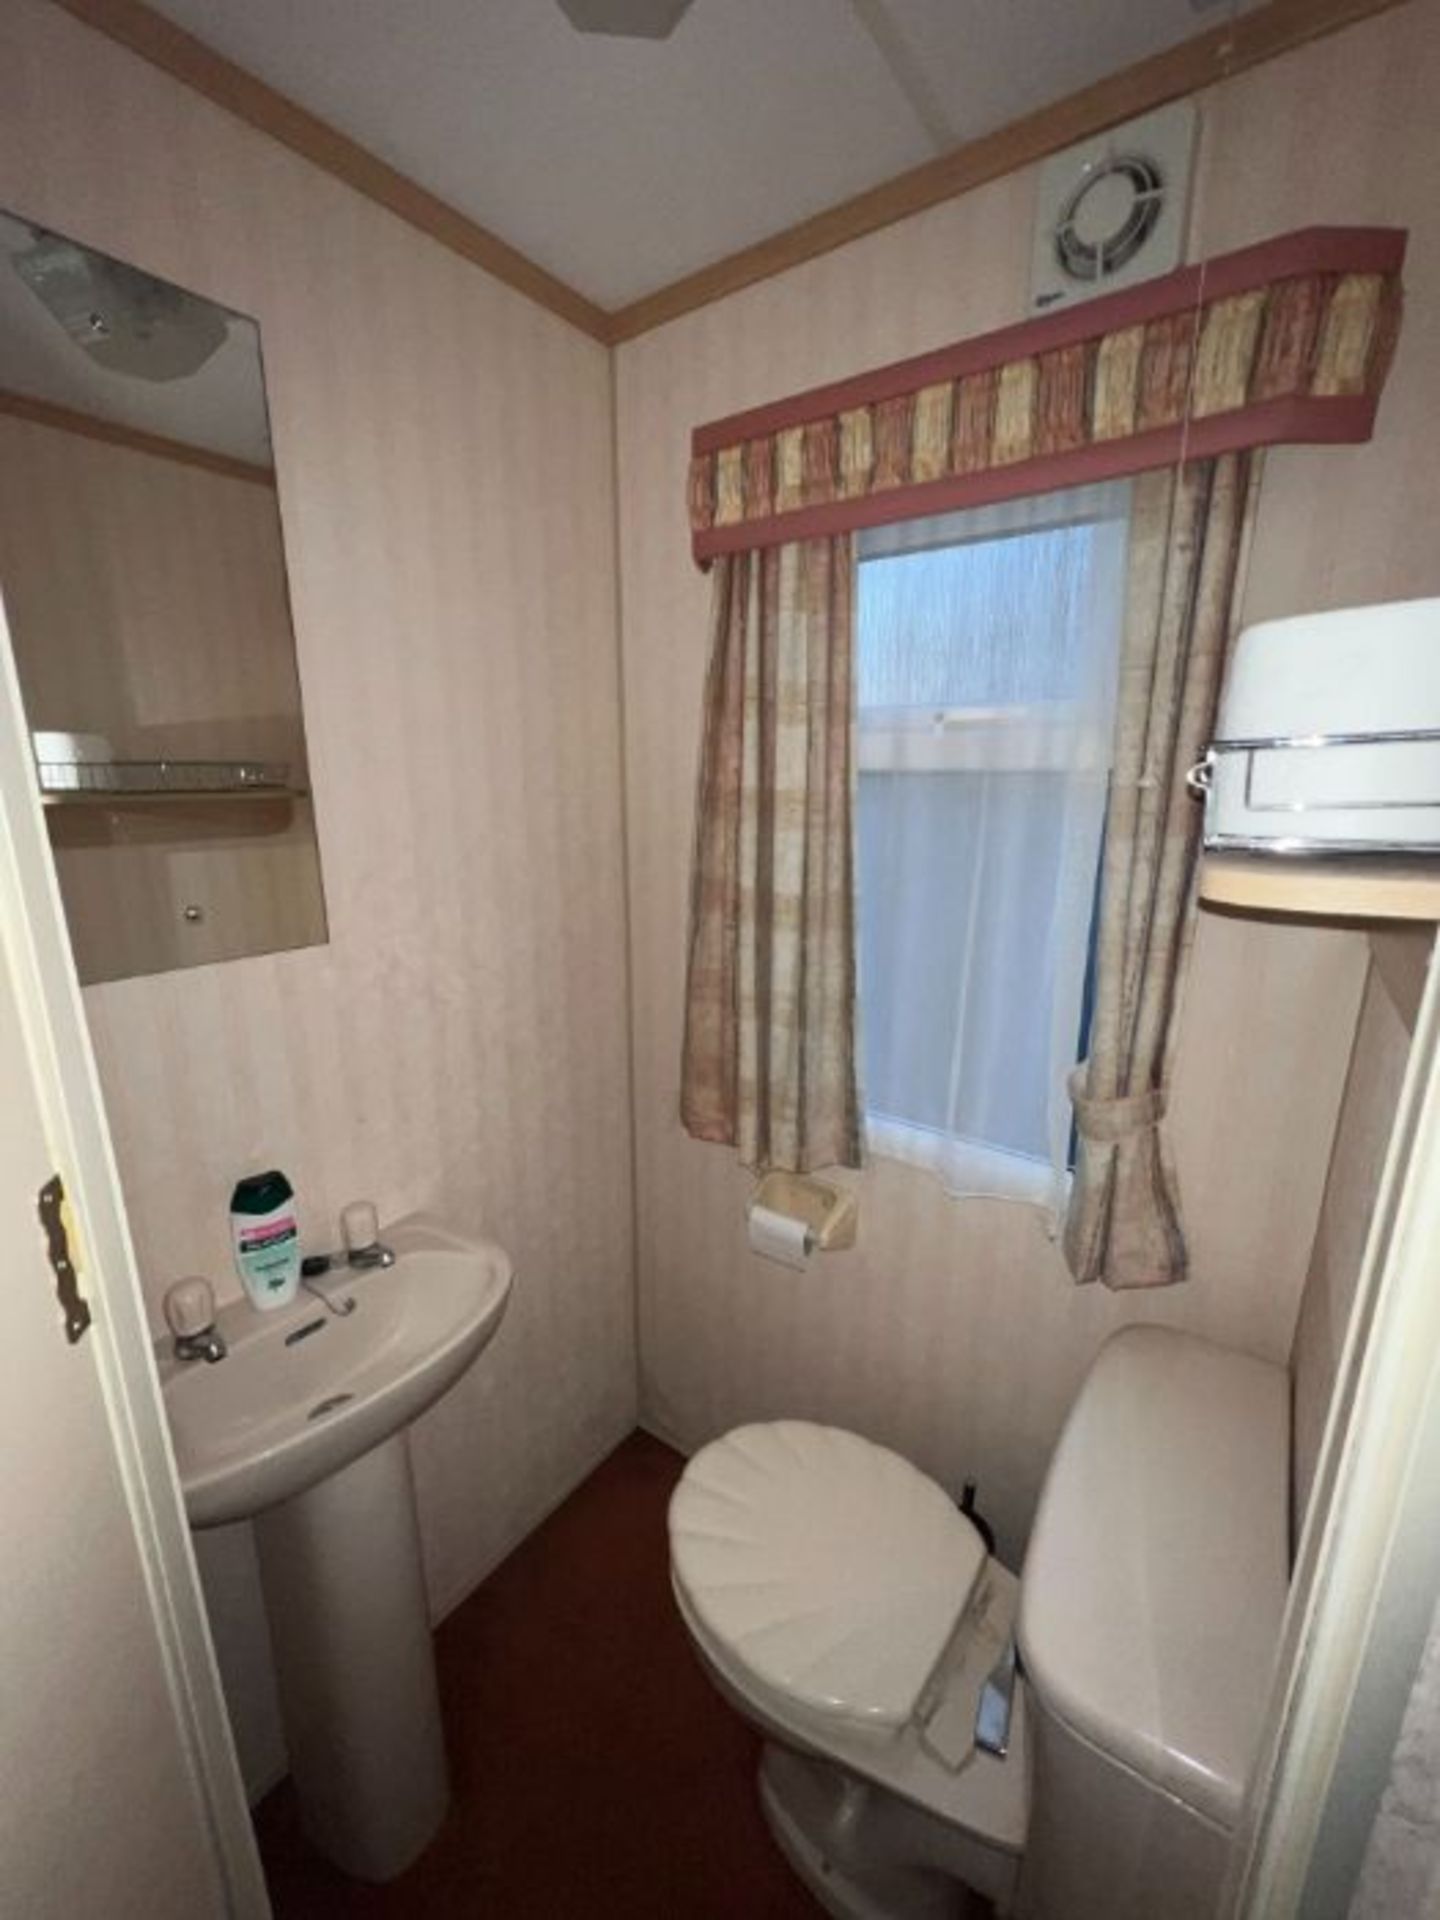 WILLERBY LYNDHURST 37FT X 12FT, 2 BEDROOM STATIC CARAVAN DOUBLE GLAZED & CENTRAL HEATING - LOCATED - Image 32 of 50